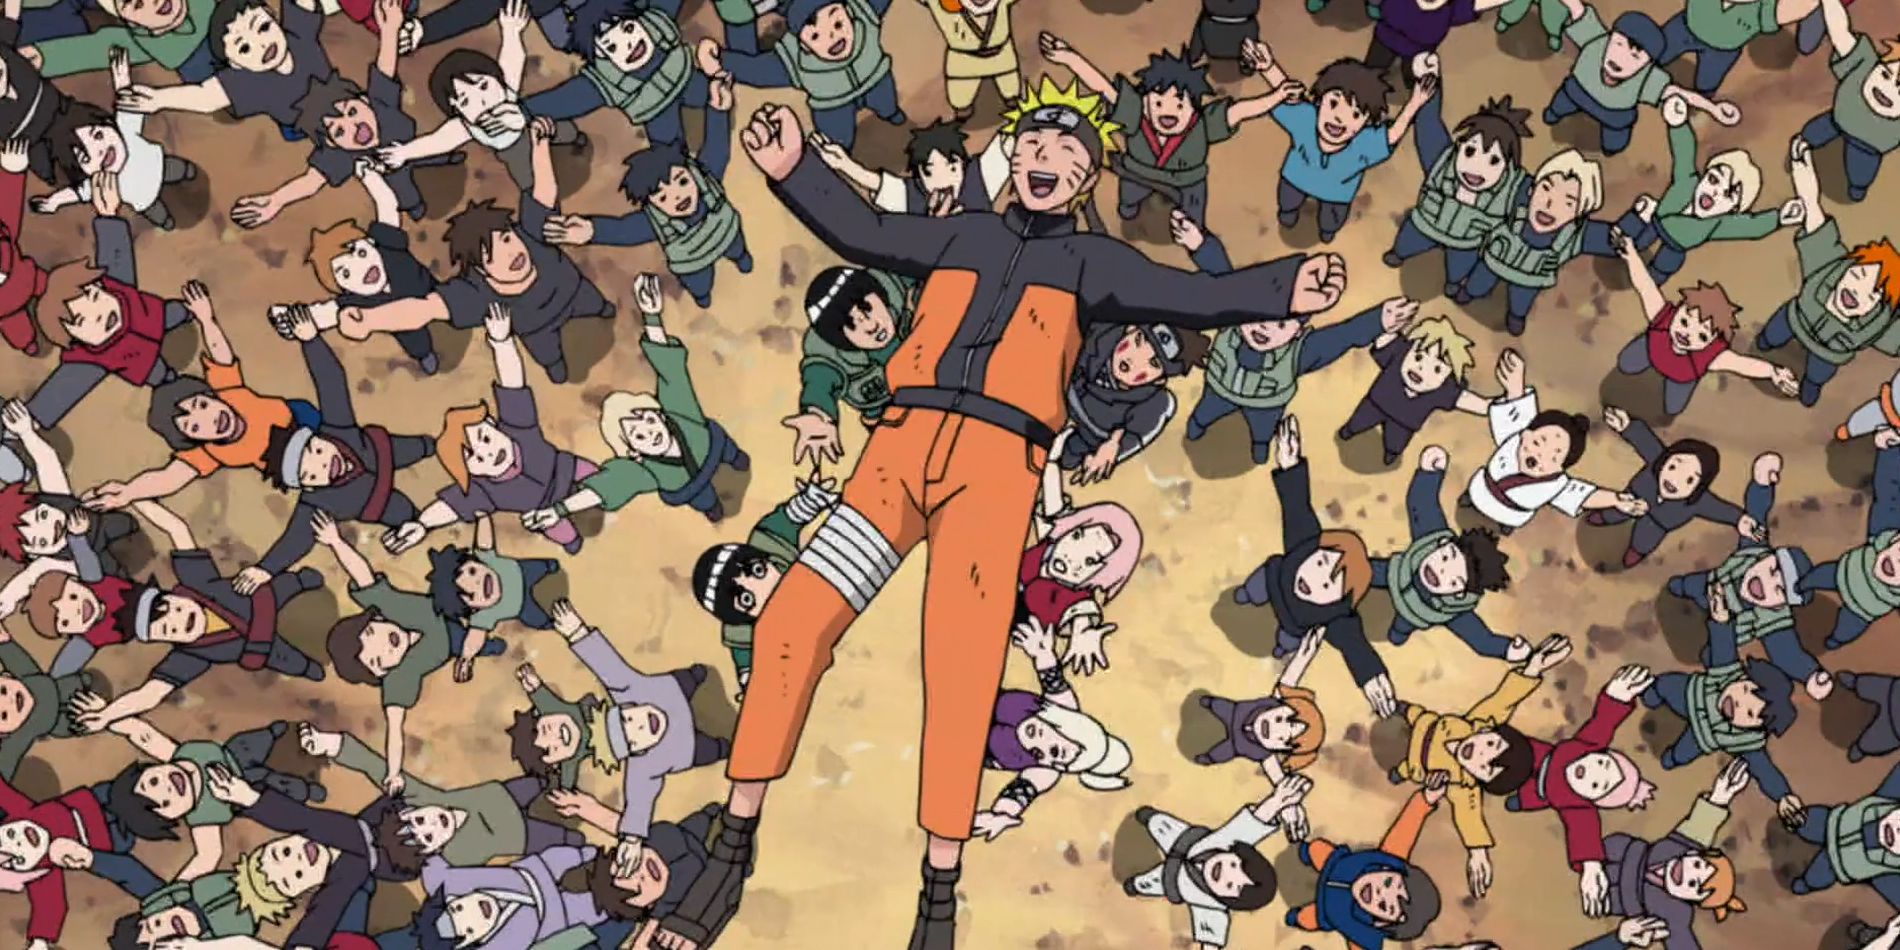 Naruto being celebrated